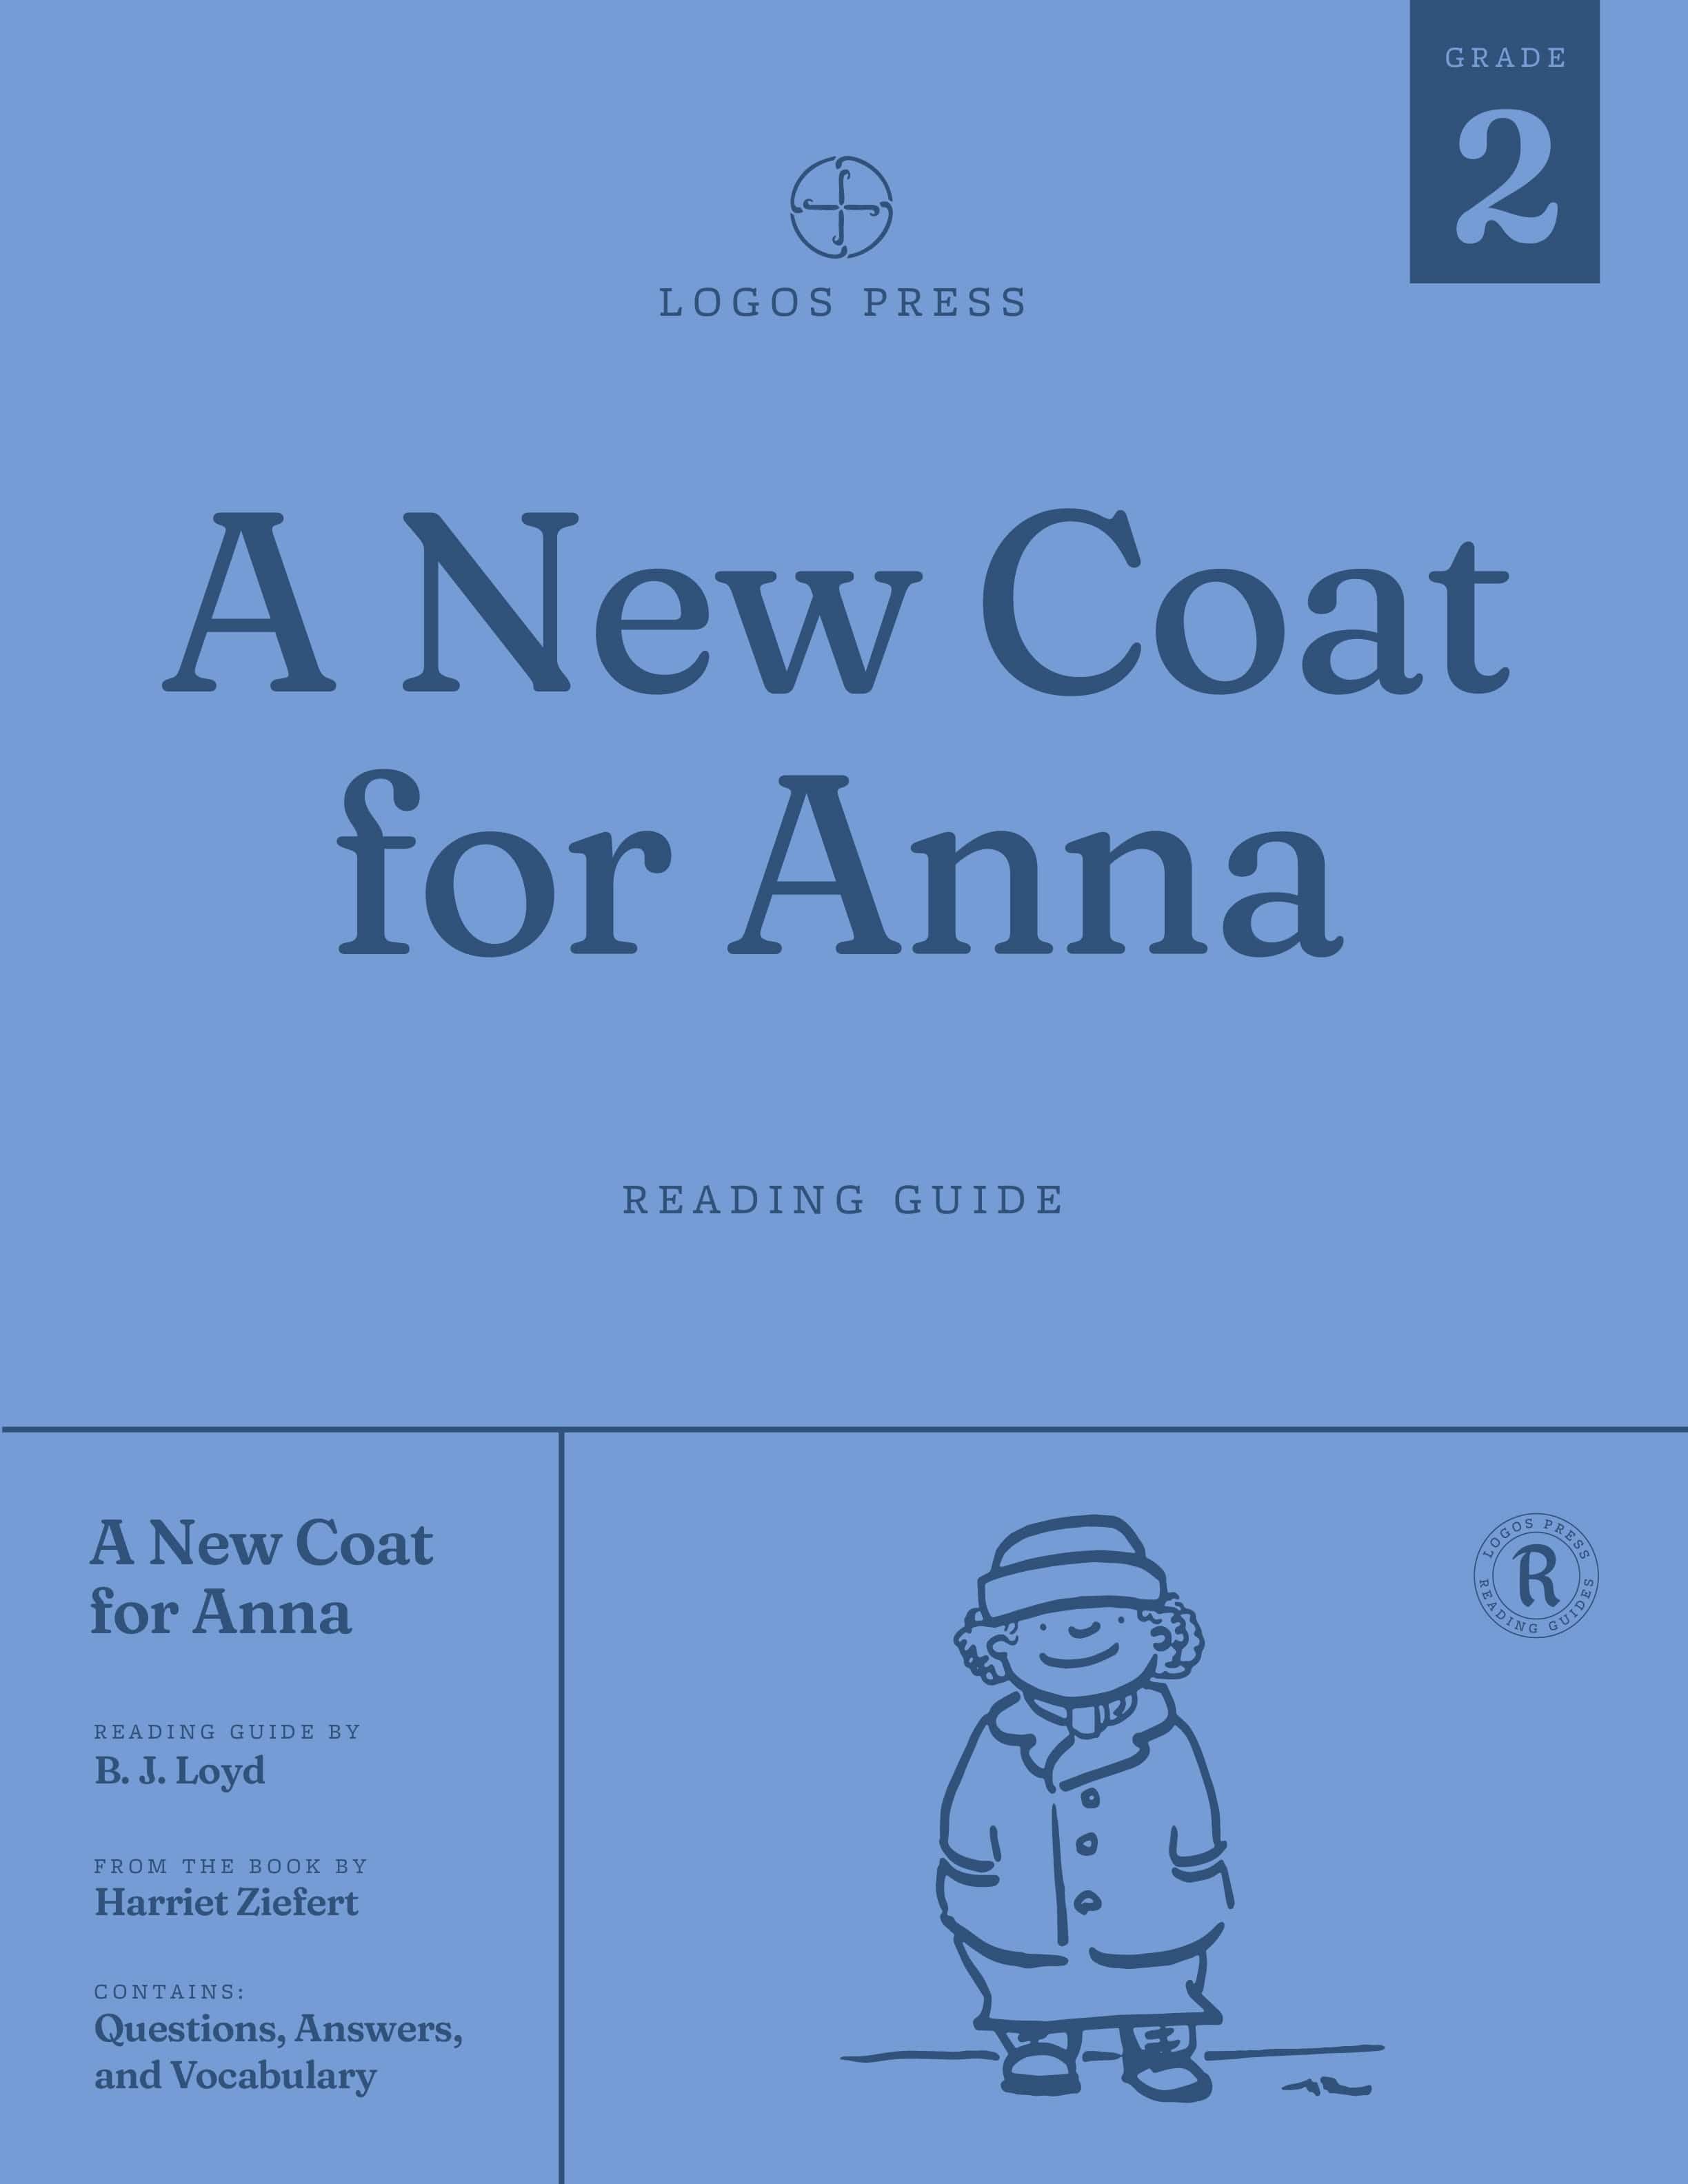 A New Coat for Anna - Reading Guide (Download)